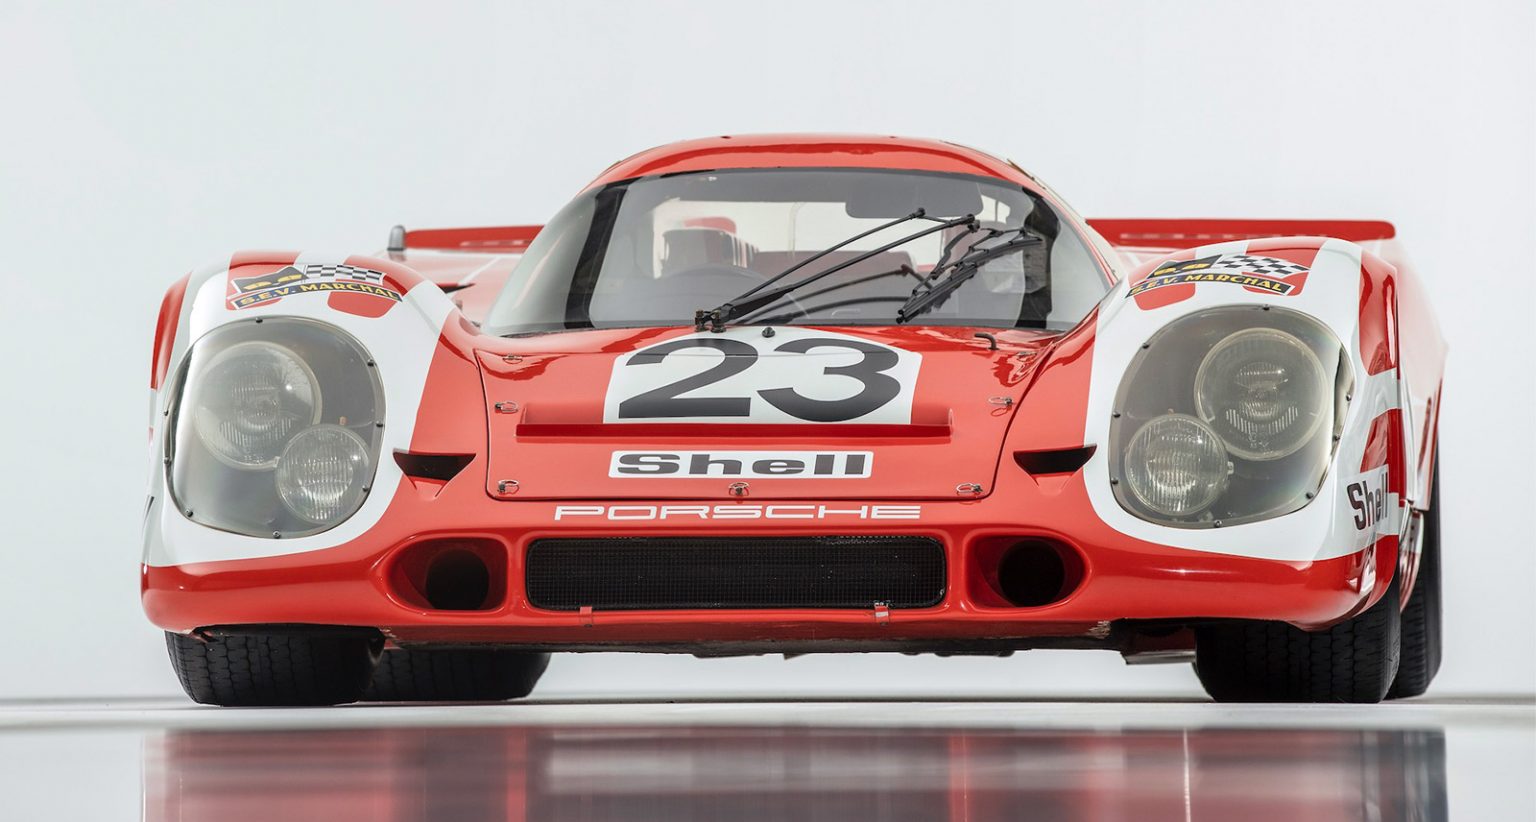 Watch Porsche’s Short Film Showcasing its Top 5 Most Iconic Livery Designs